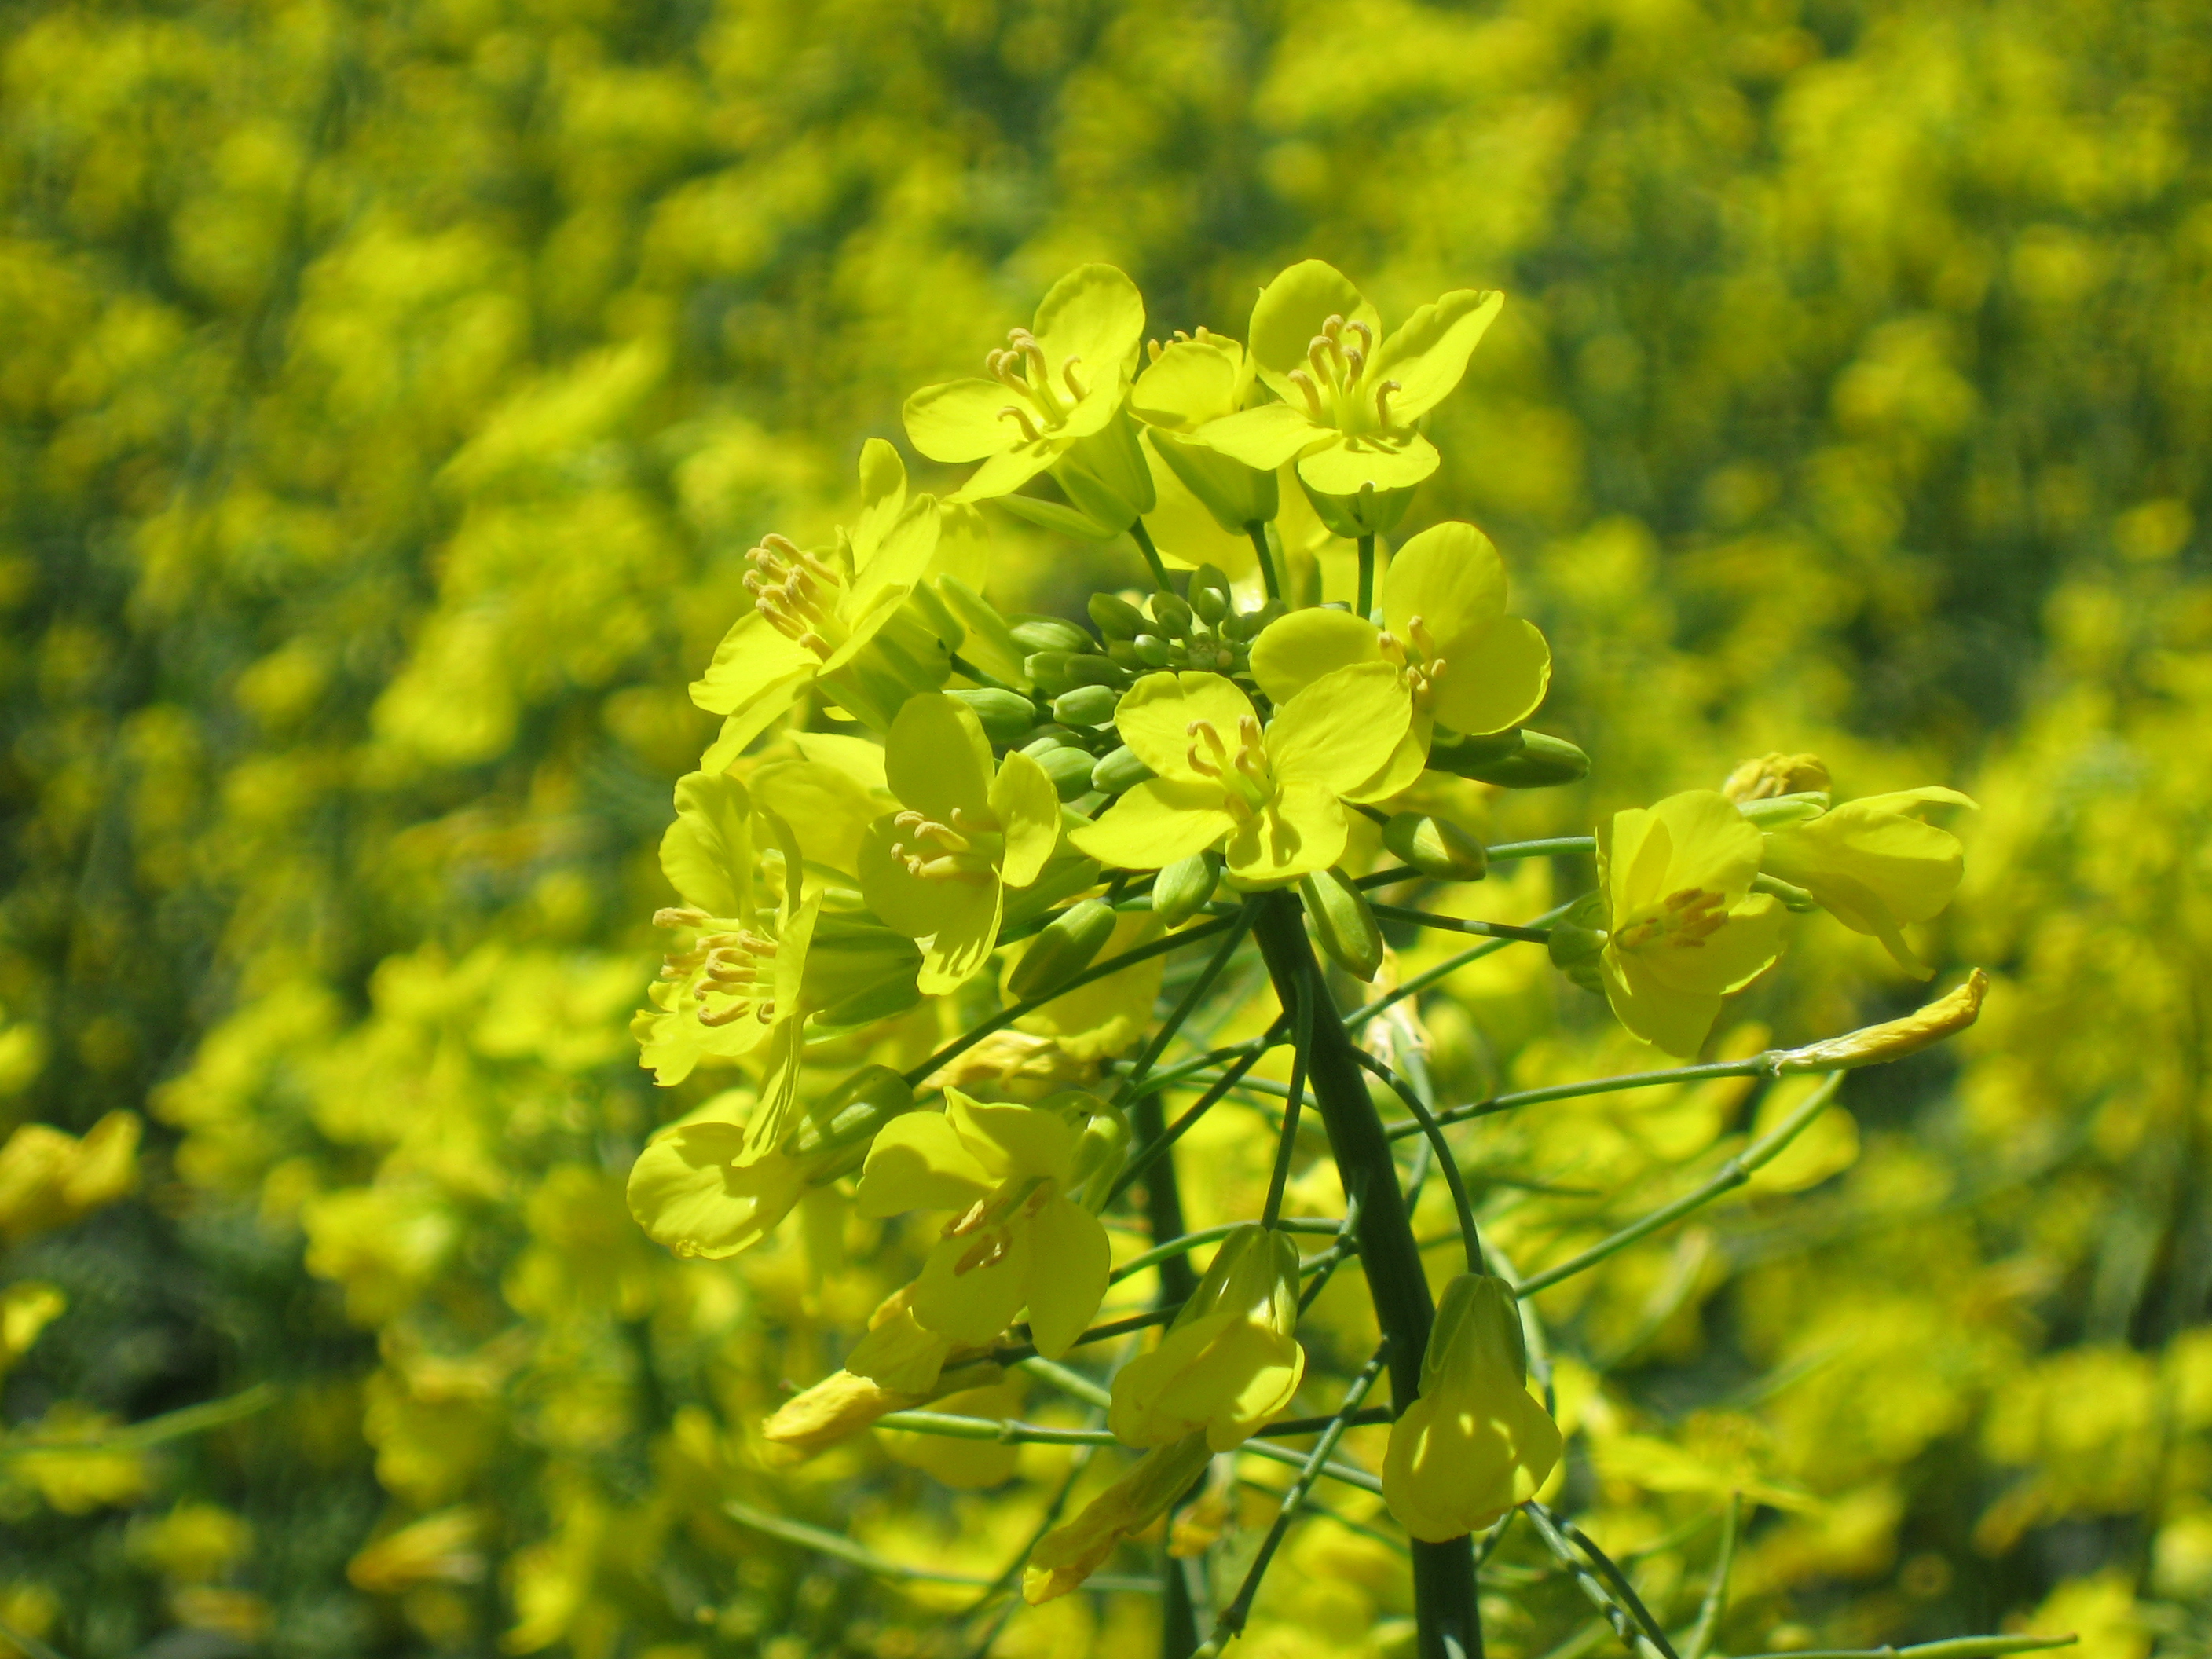 The 2011 Winter Canola Crop Looking Good in the Oklahoma Wheat Belt